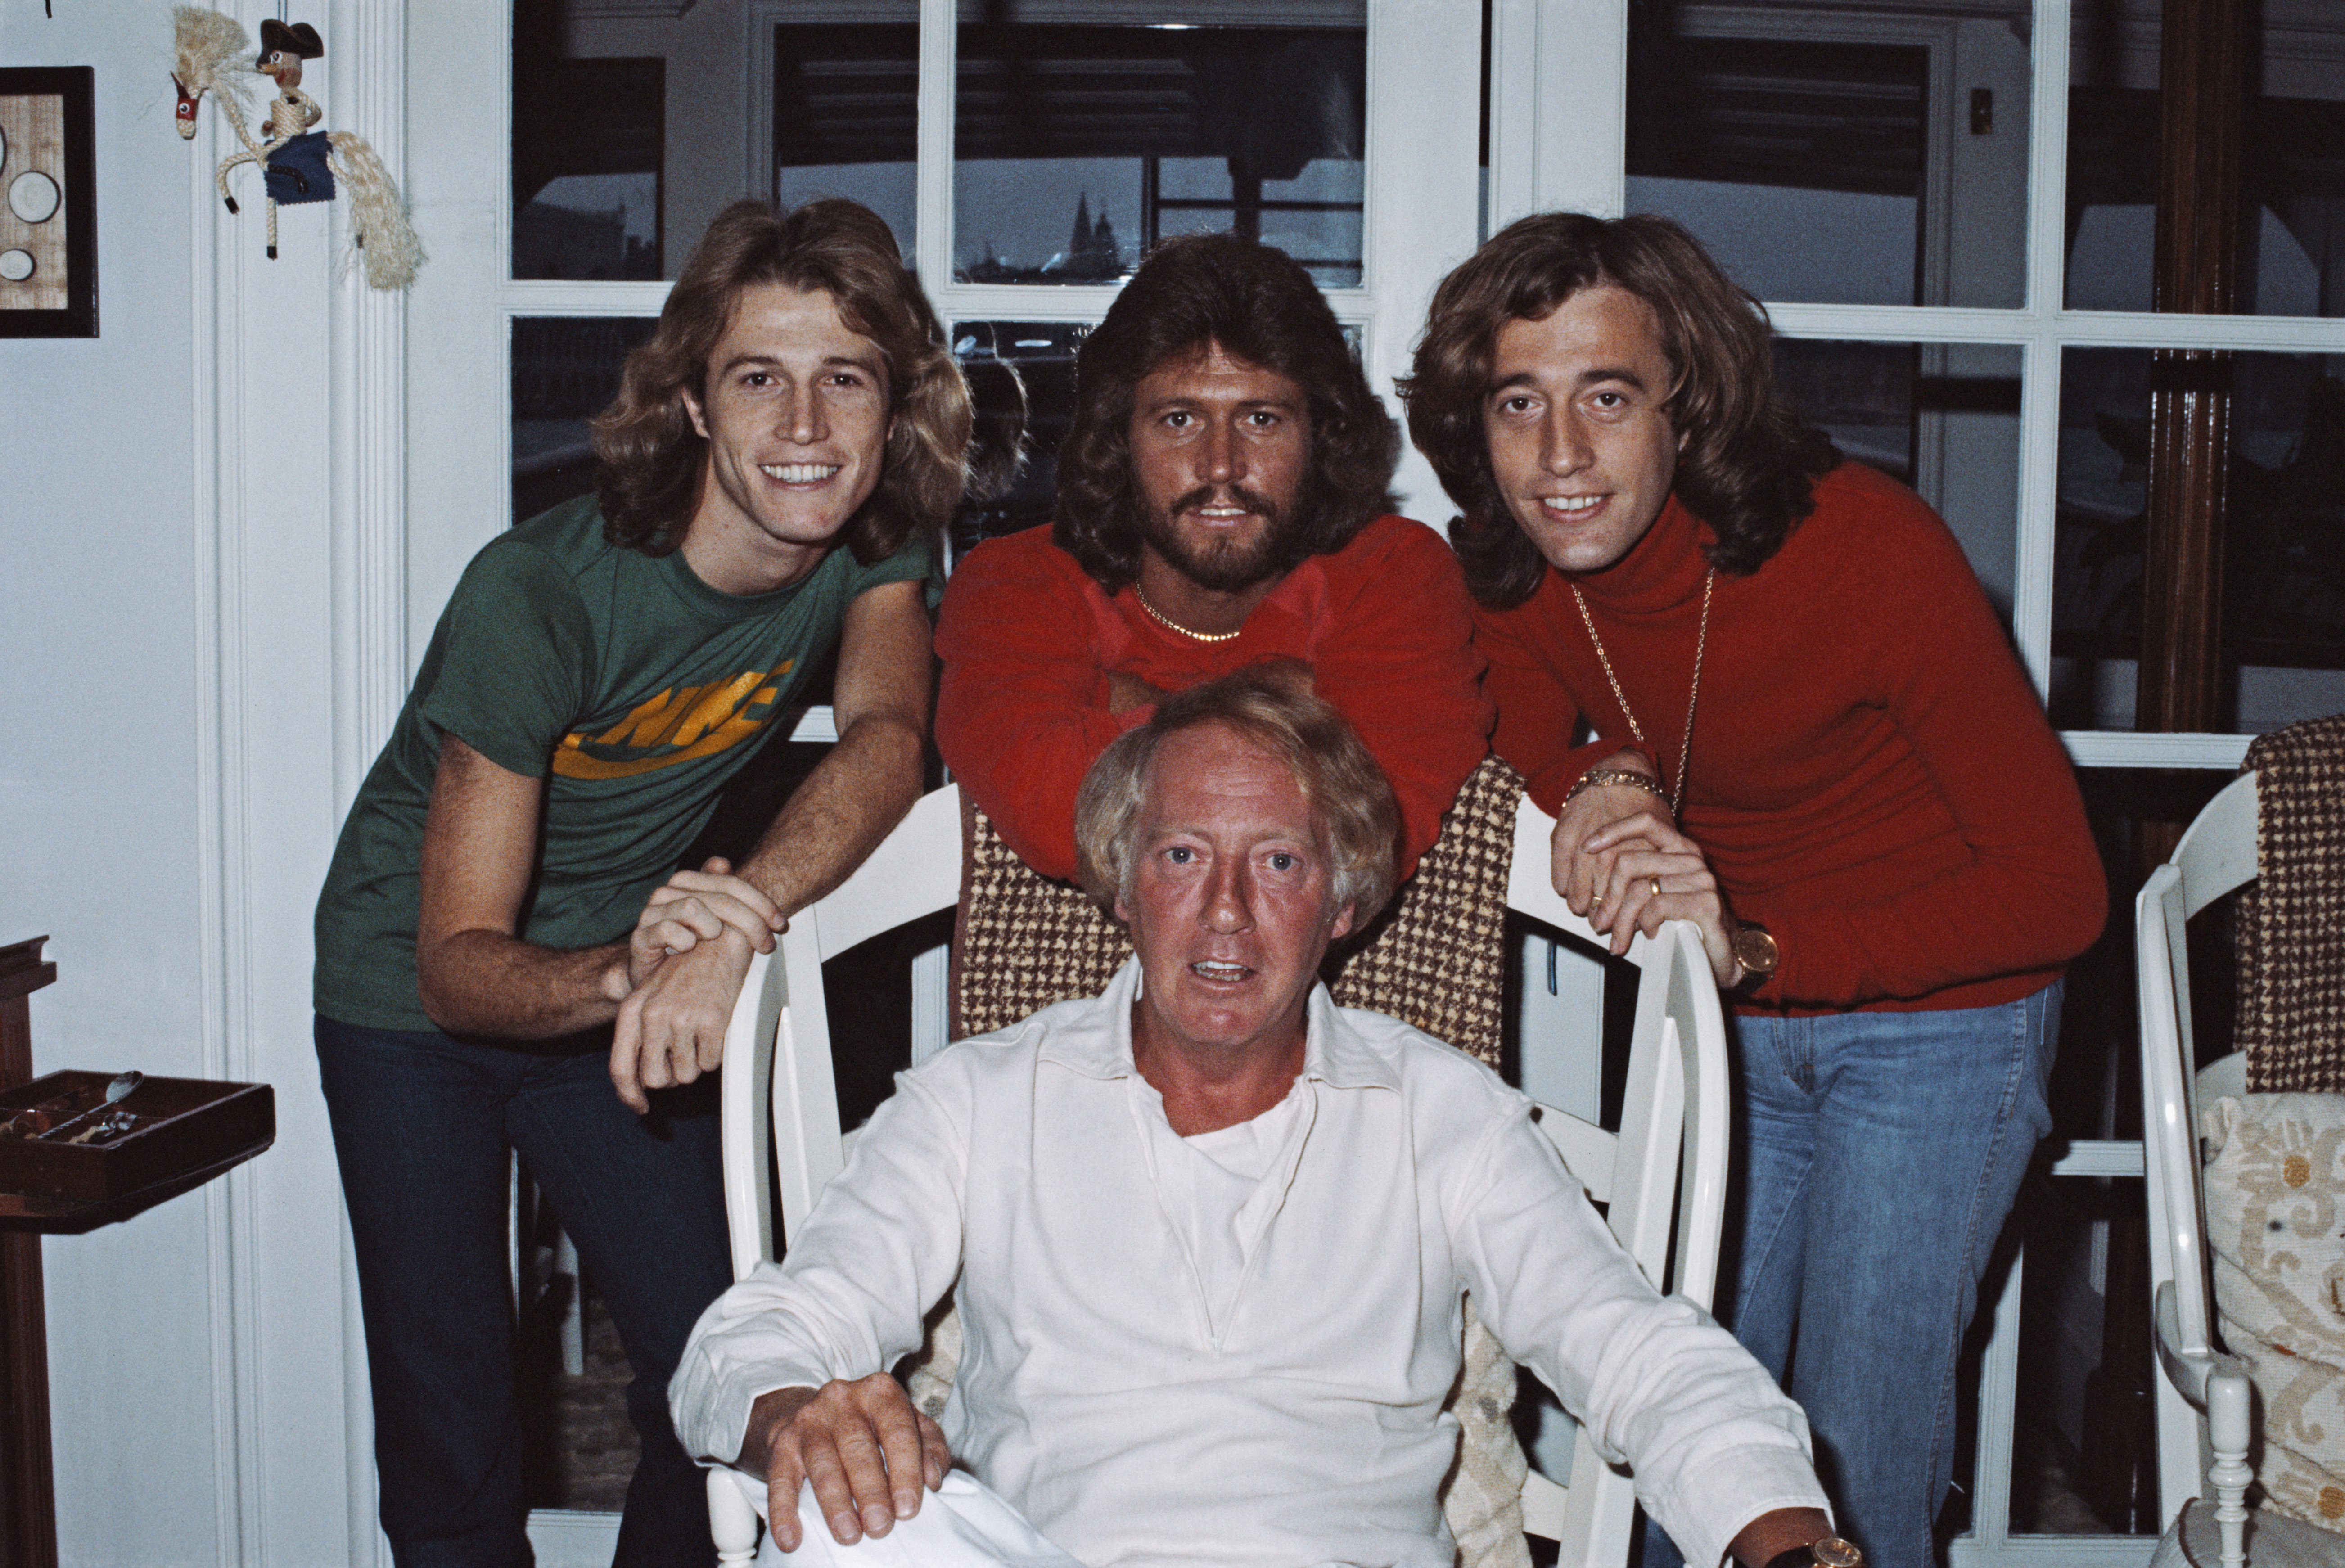 Andy Gibb, Barry Gibb, and Robin Gibb with Australian music entrepreneur Robert Stigwood in February 1979 | Source: Getty Images